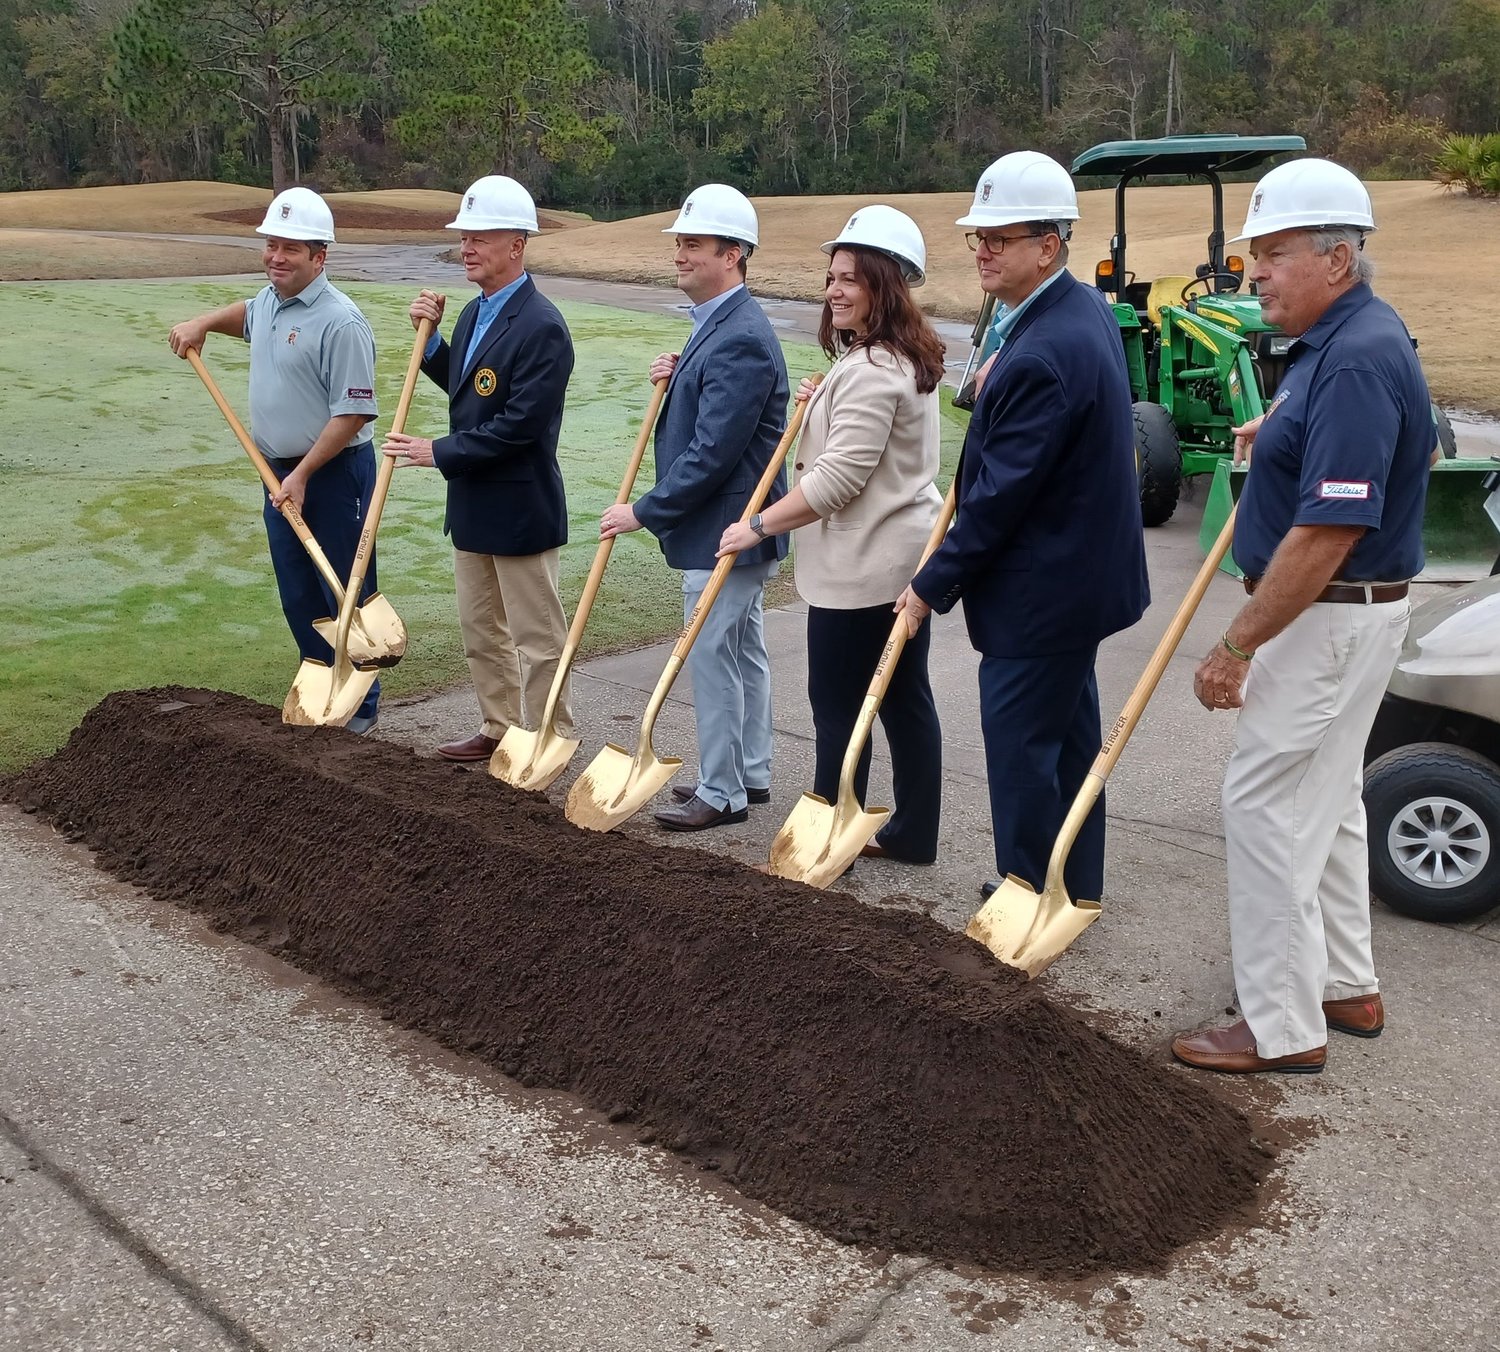 Ceremonially breaking ground for the $8 million project to renovate the St. Johns Golf Club are, from left, course Superintendent Anthony Baur, designer Erik Larson, County Commissioner Christian Whitehurst, Assistant Personnel Services Director Sarah Taylor, Director of Golf Wes Tucker and County Commissioner Henry Dean.